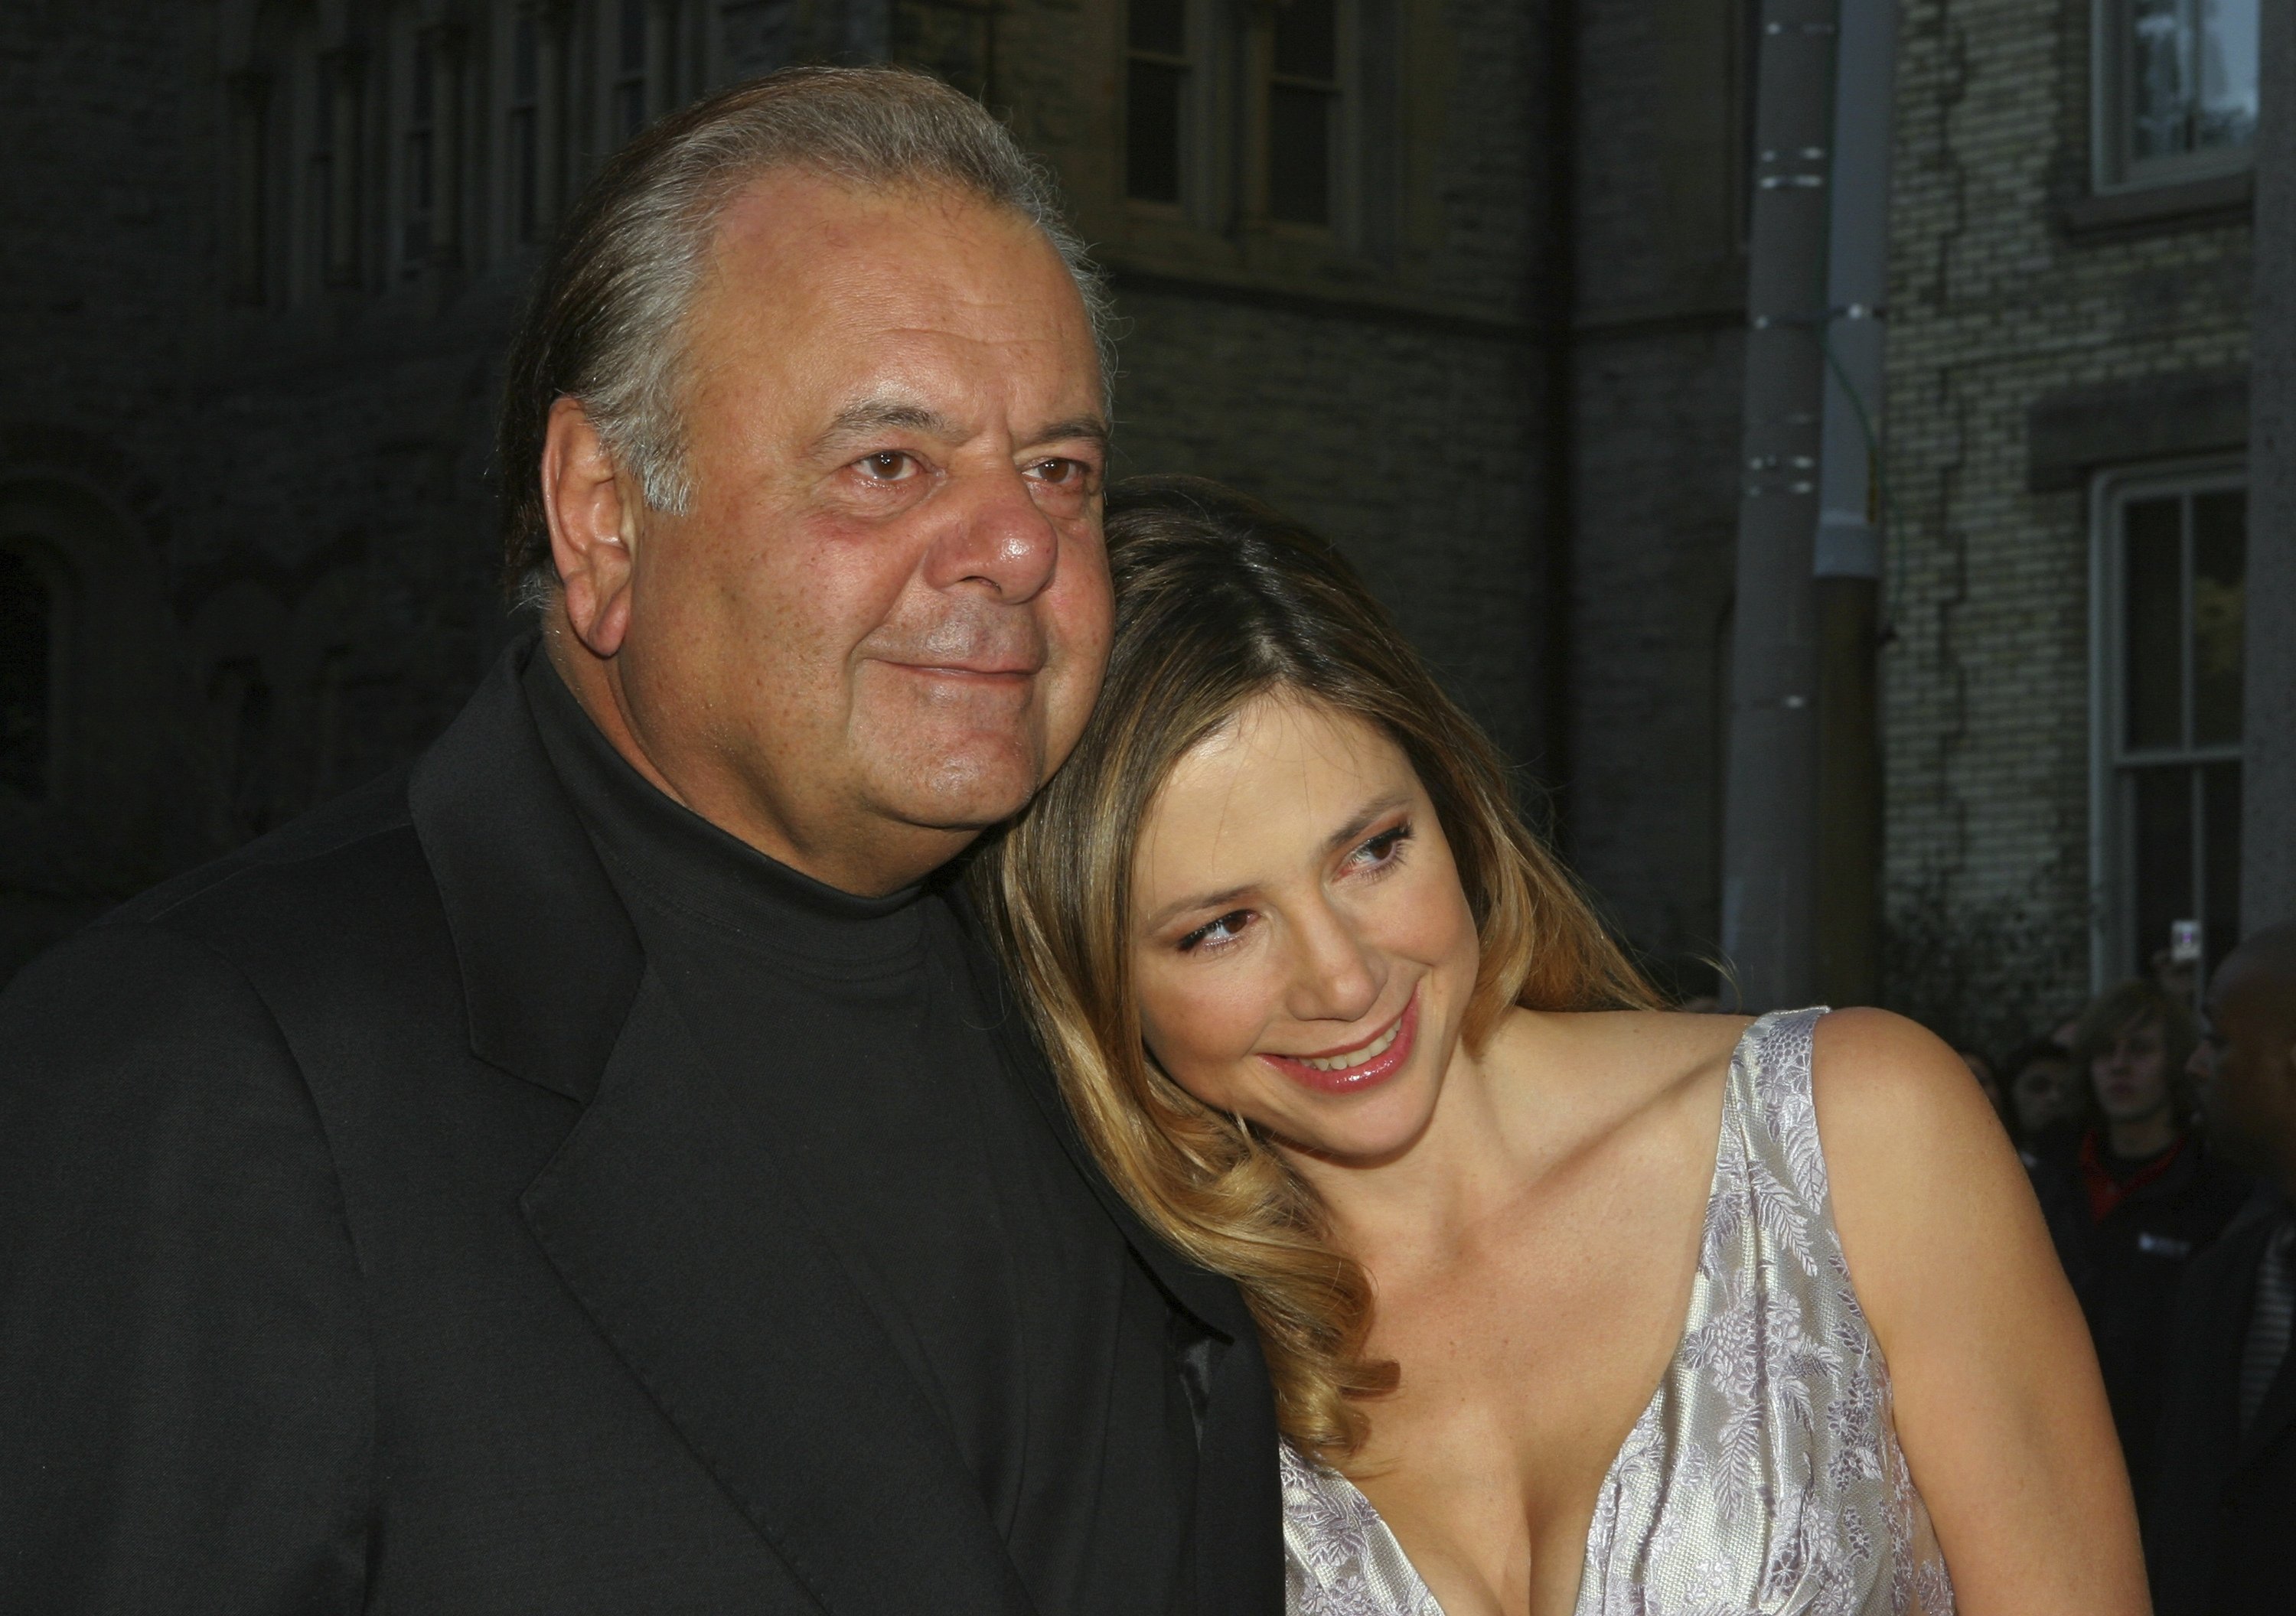 Paul Sorvino (L) and his daughter Mira Sorvino attend the premiere of 